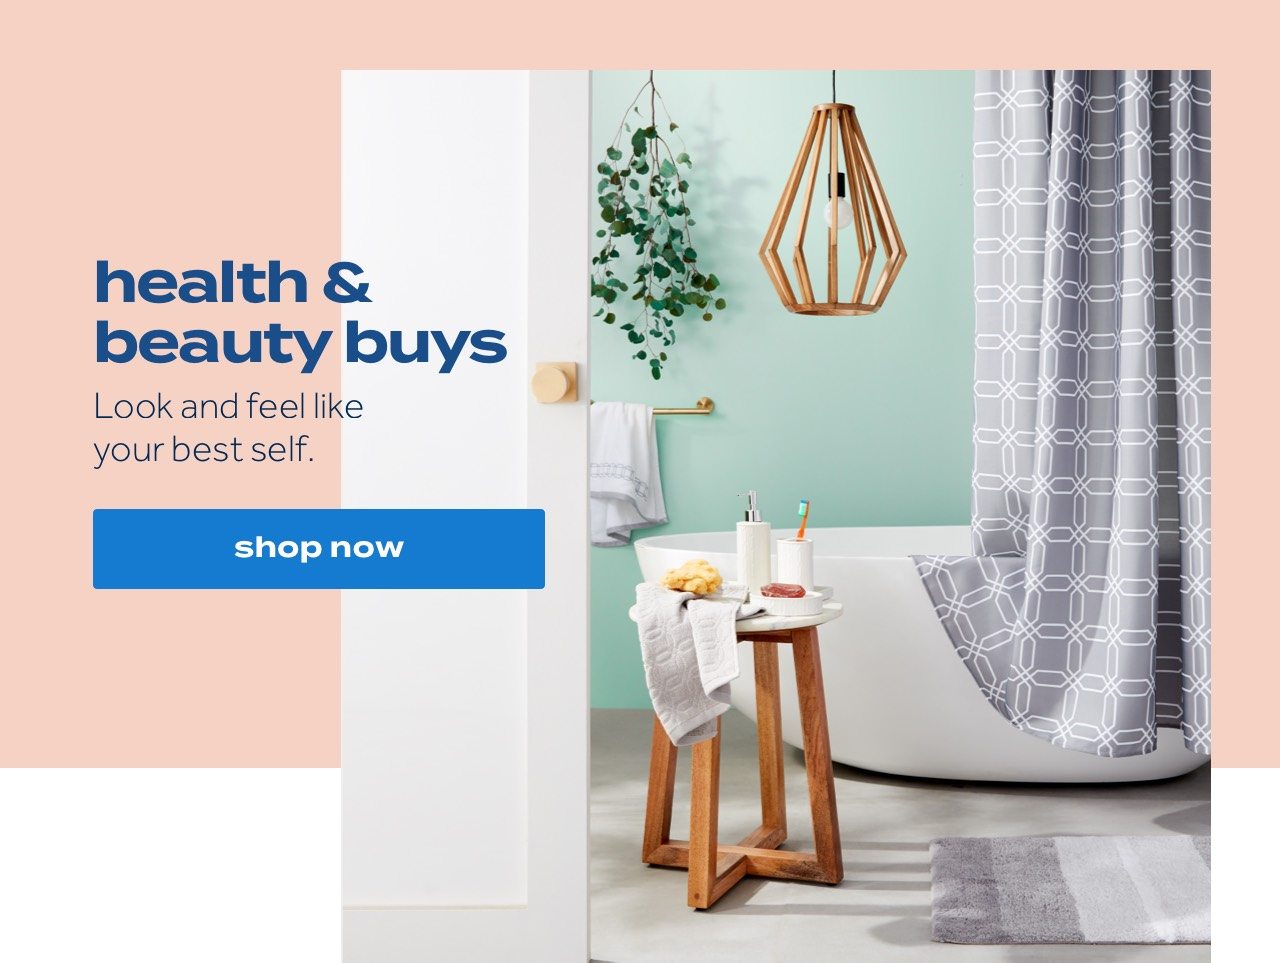 health & beauty buys. Look and feel like your best self. shop now